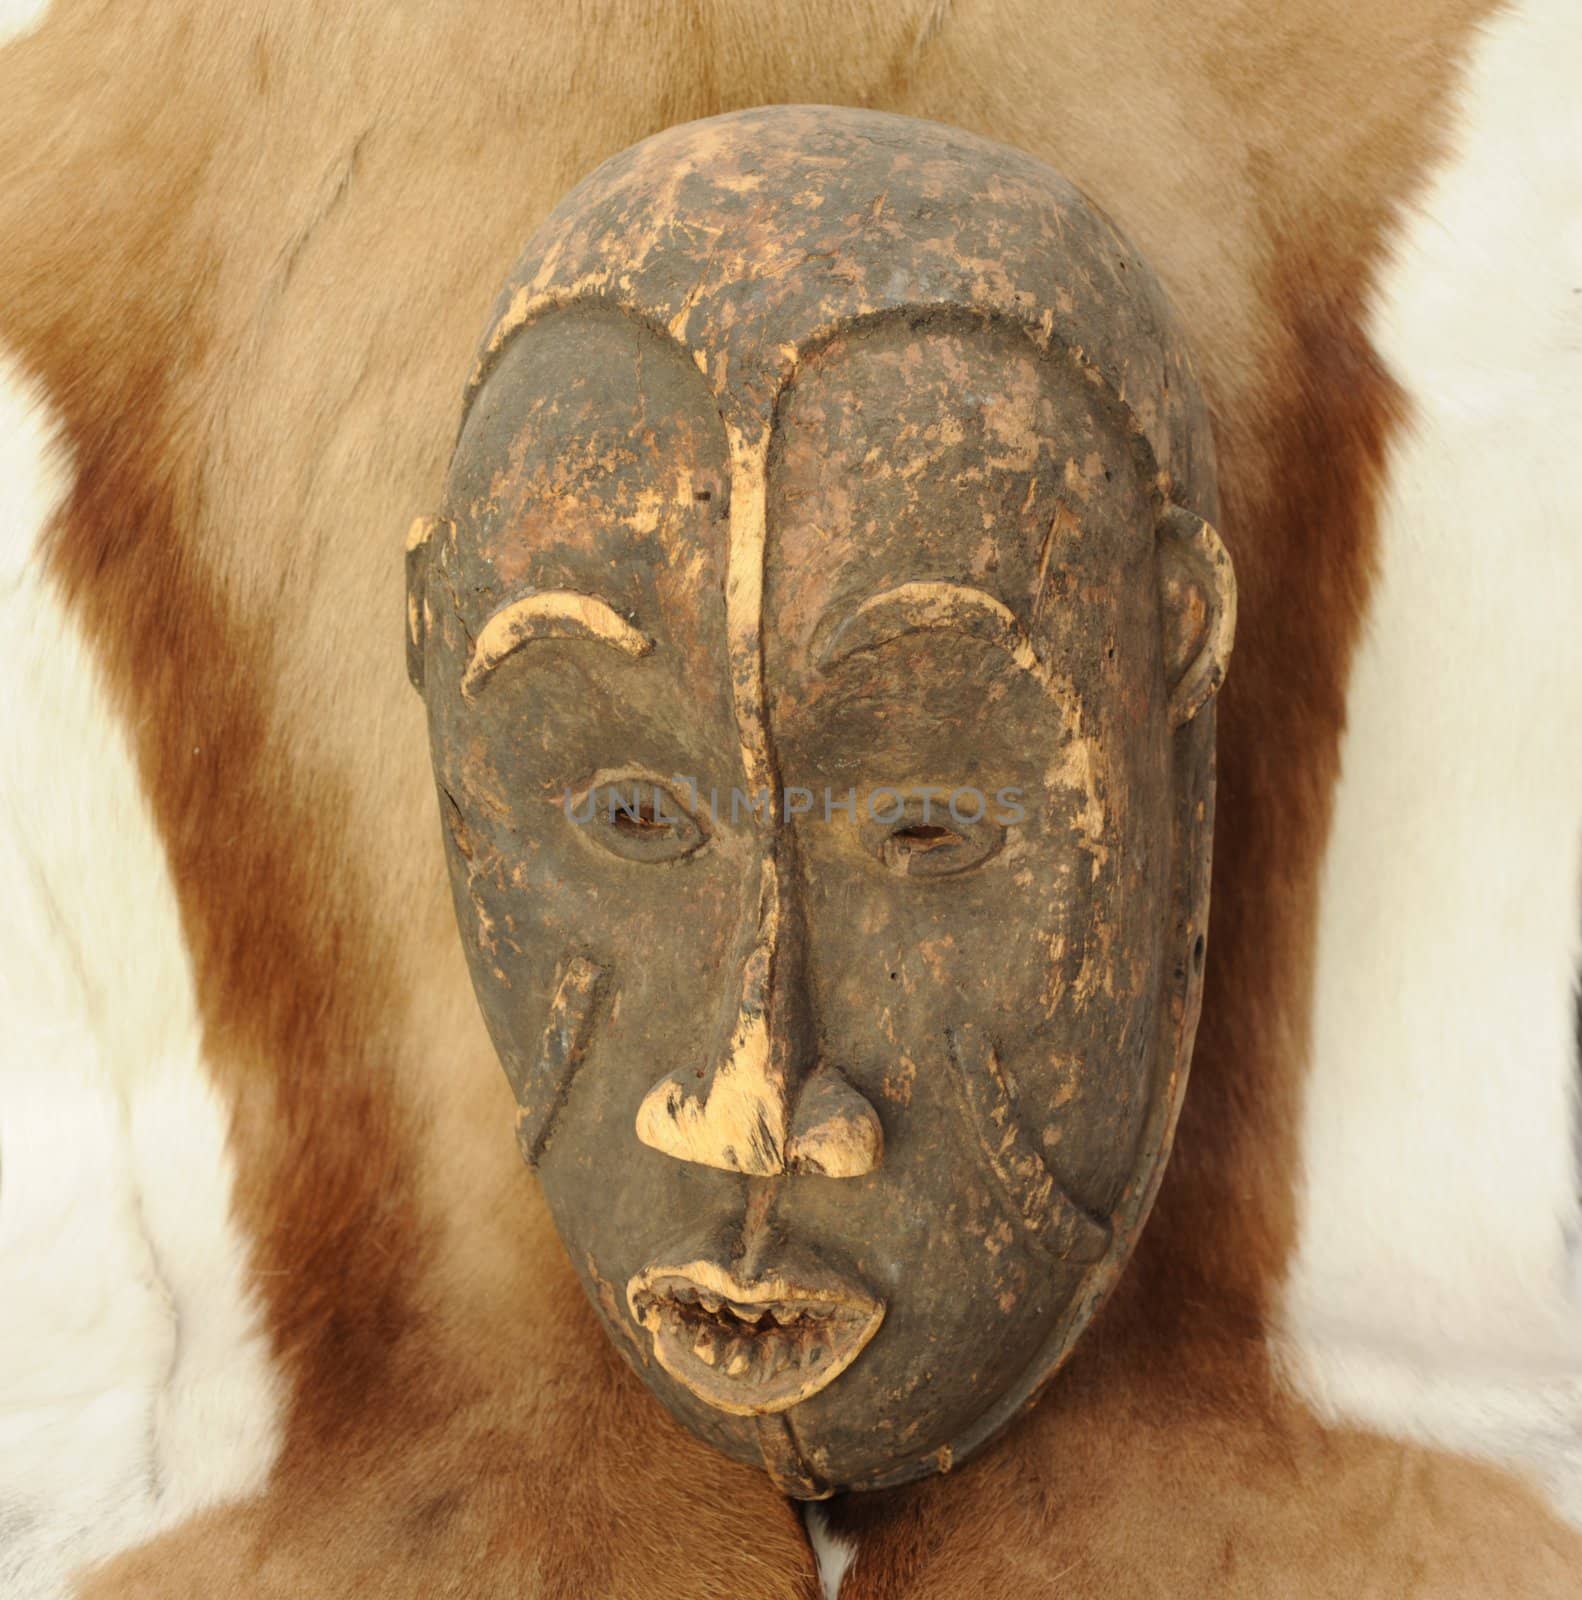 Handmade Antique African Mask on a Fur of 
Wild African Animal.